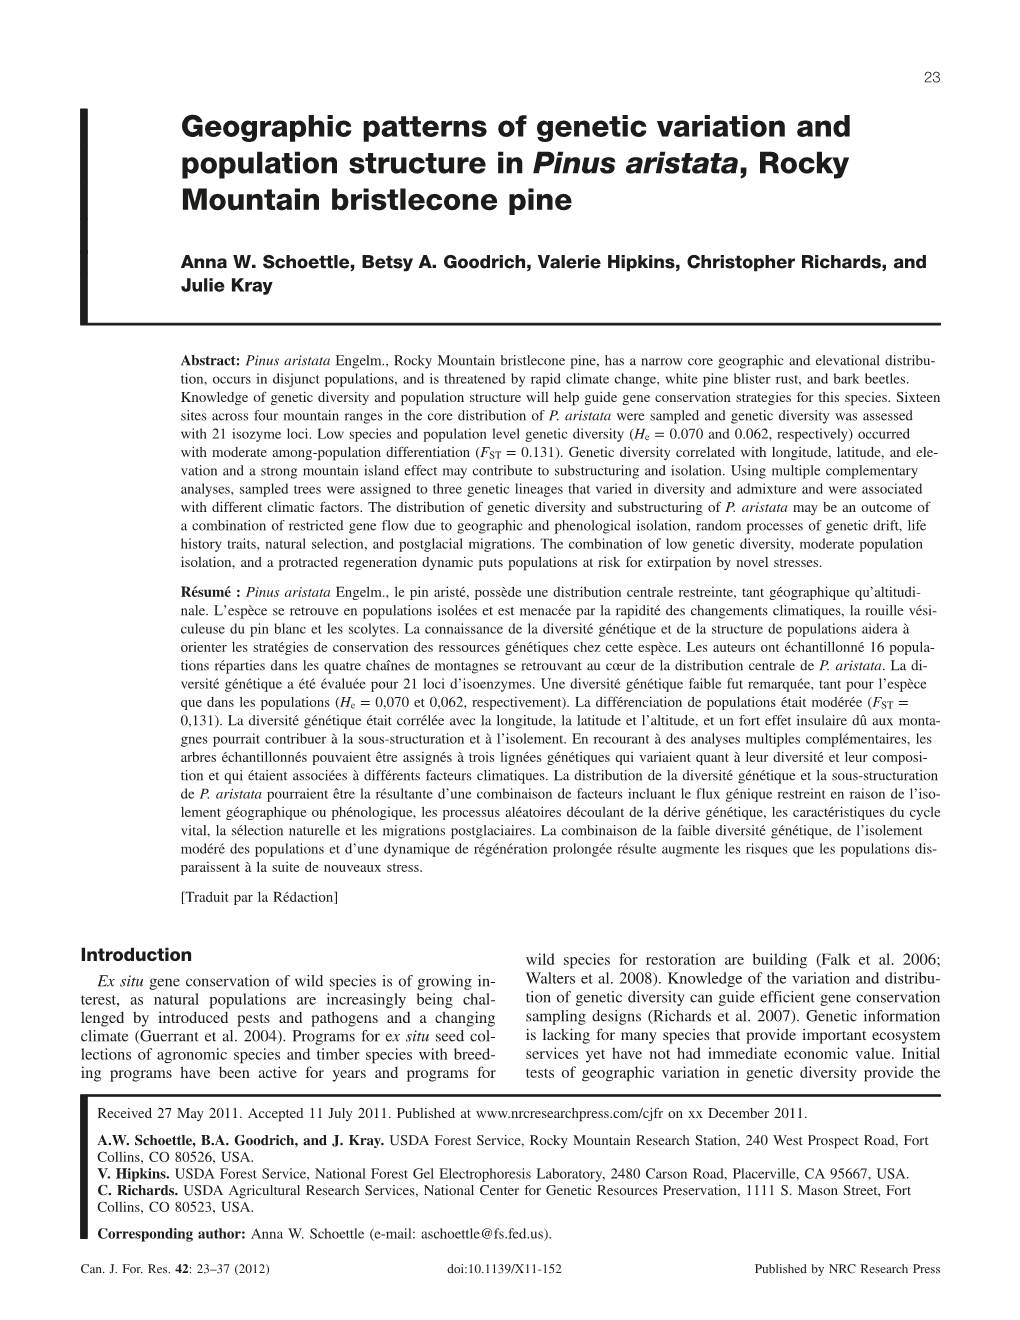 Geographic Patterns of Genetic Variation and Population Structure in Pinus Aristata, Rocky Mountain Bristlecone Pine